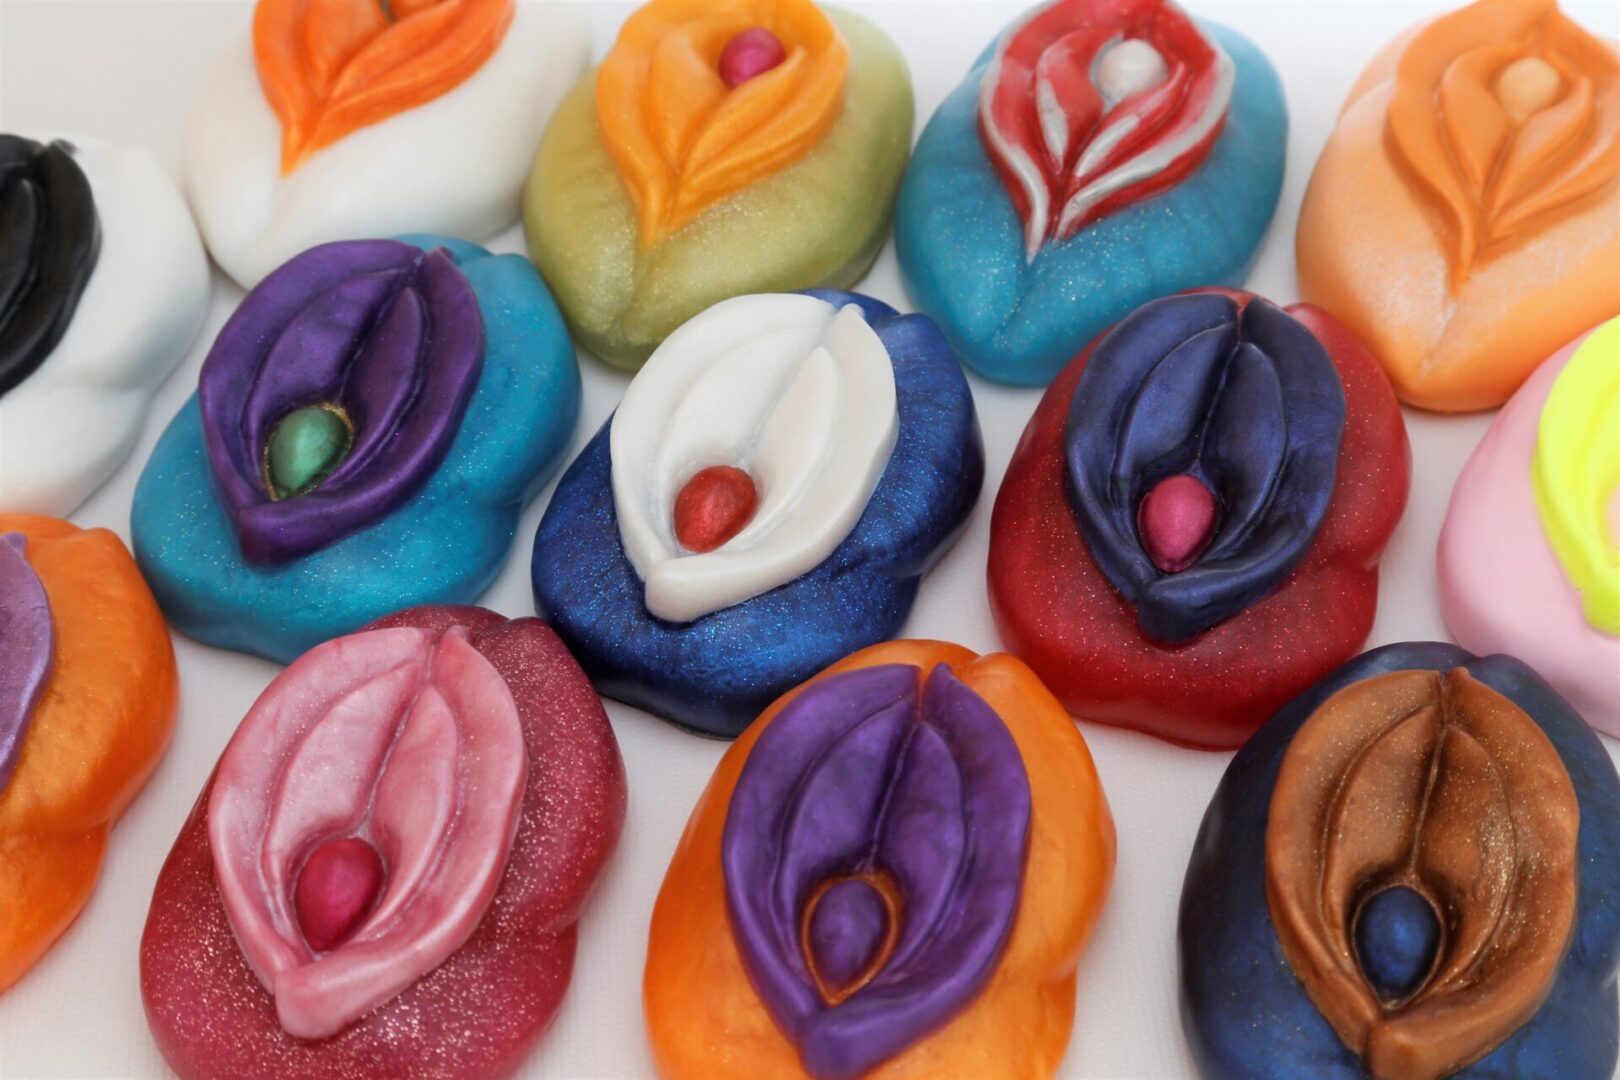  Our gorgeous & delectably-scented vajayjays really raise the bar (of soap)!